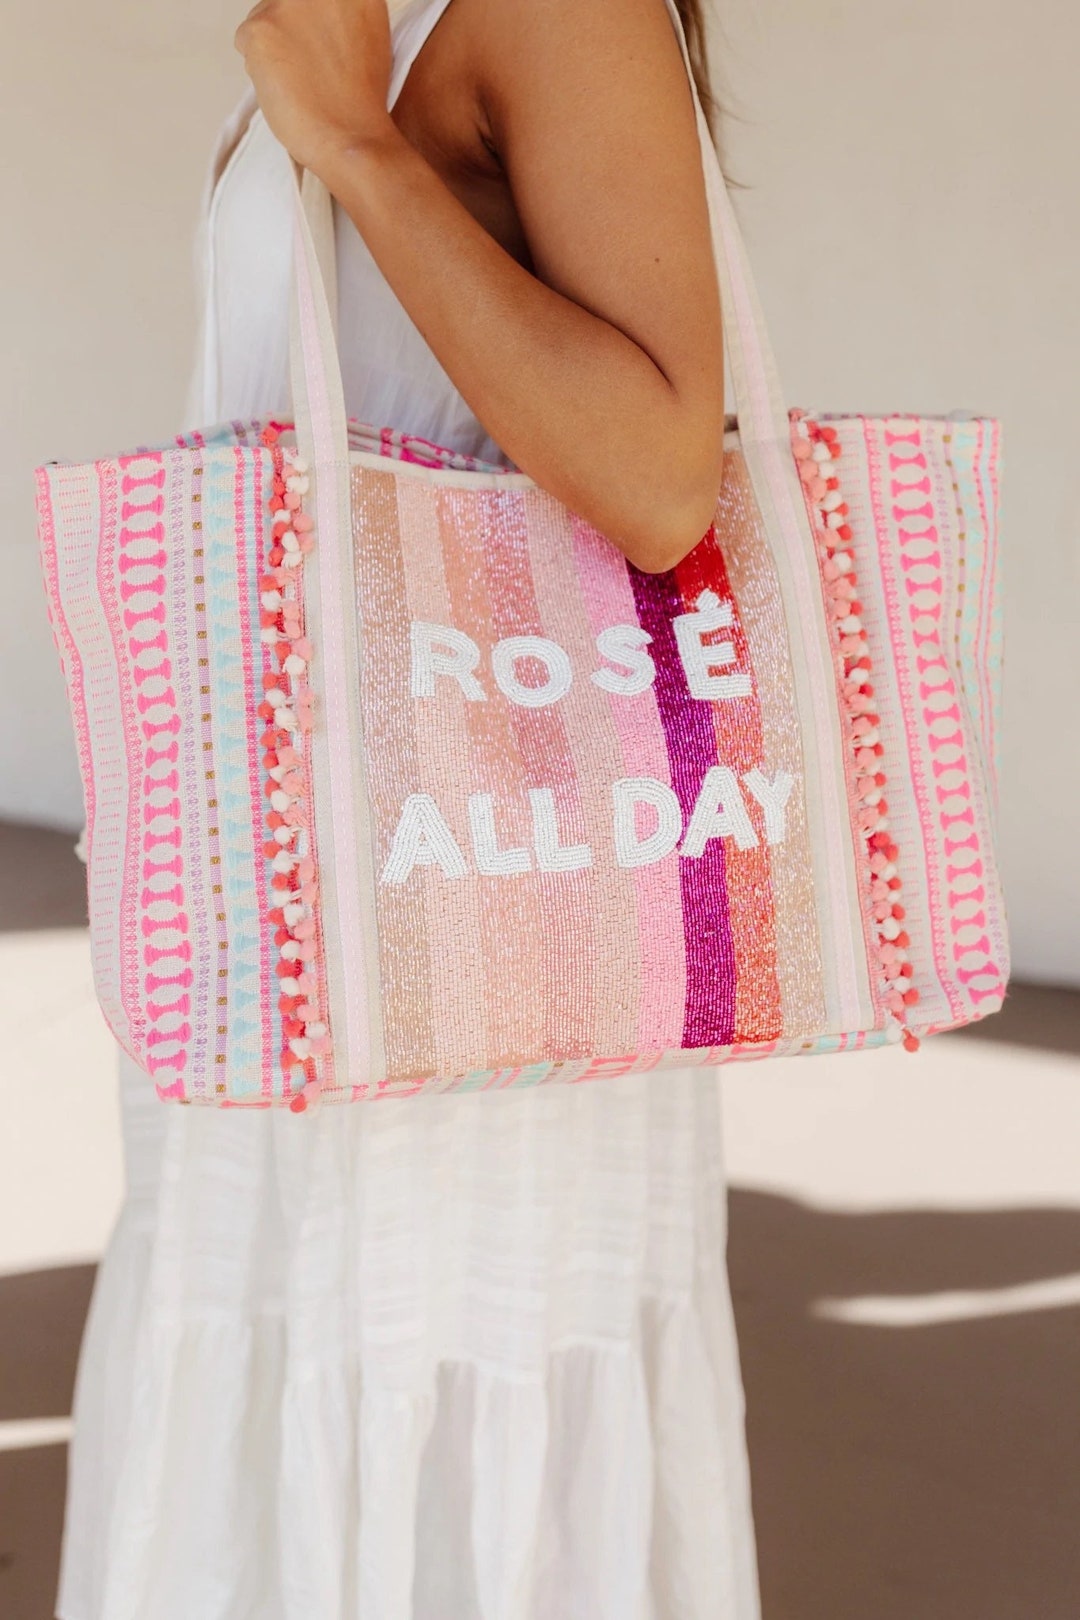 Rose All Day Beaded Beach Bag Purse /pink Striped / Large Tote / Pom ...